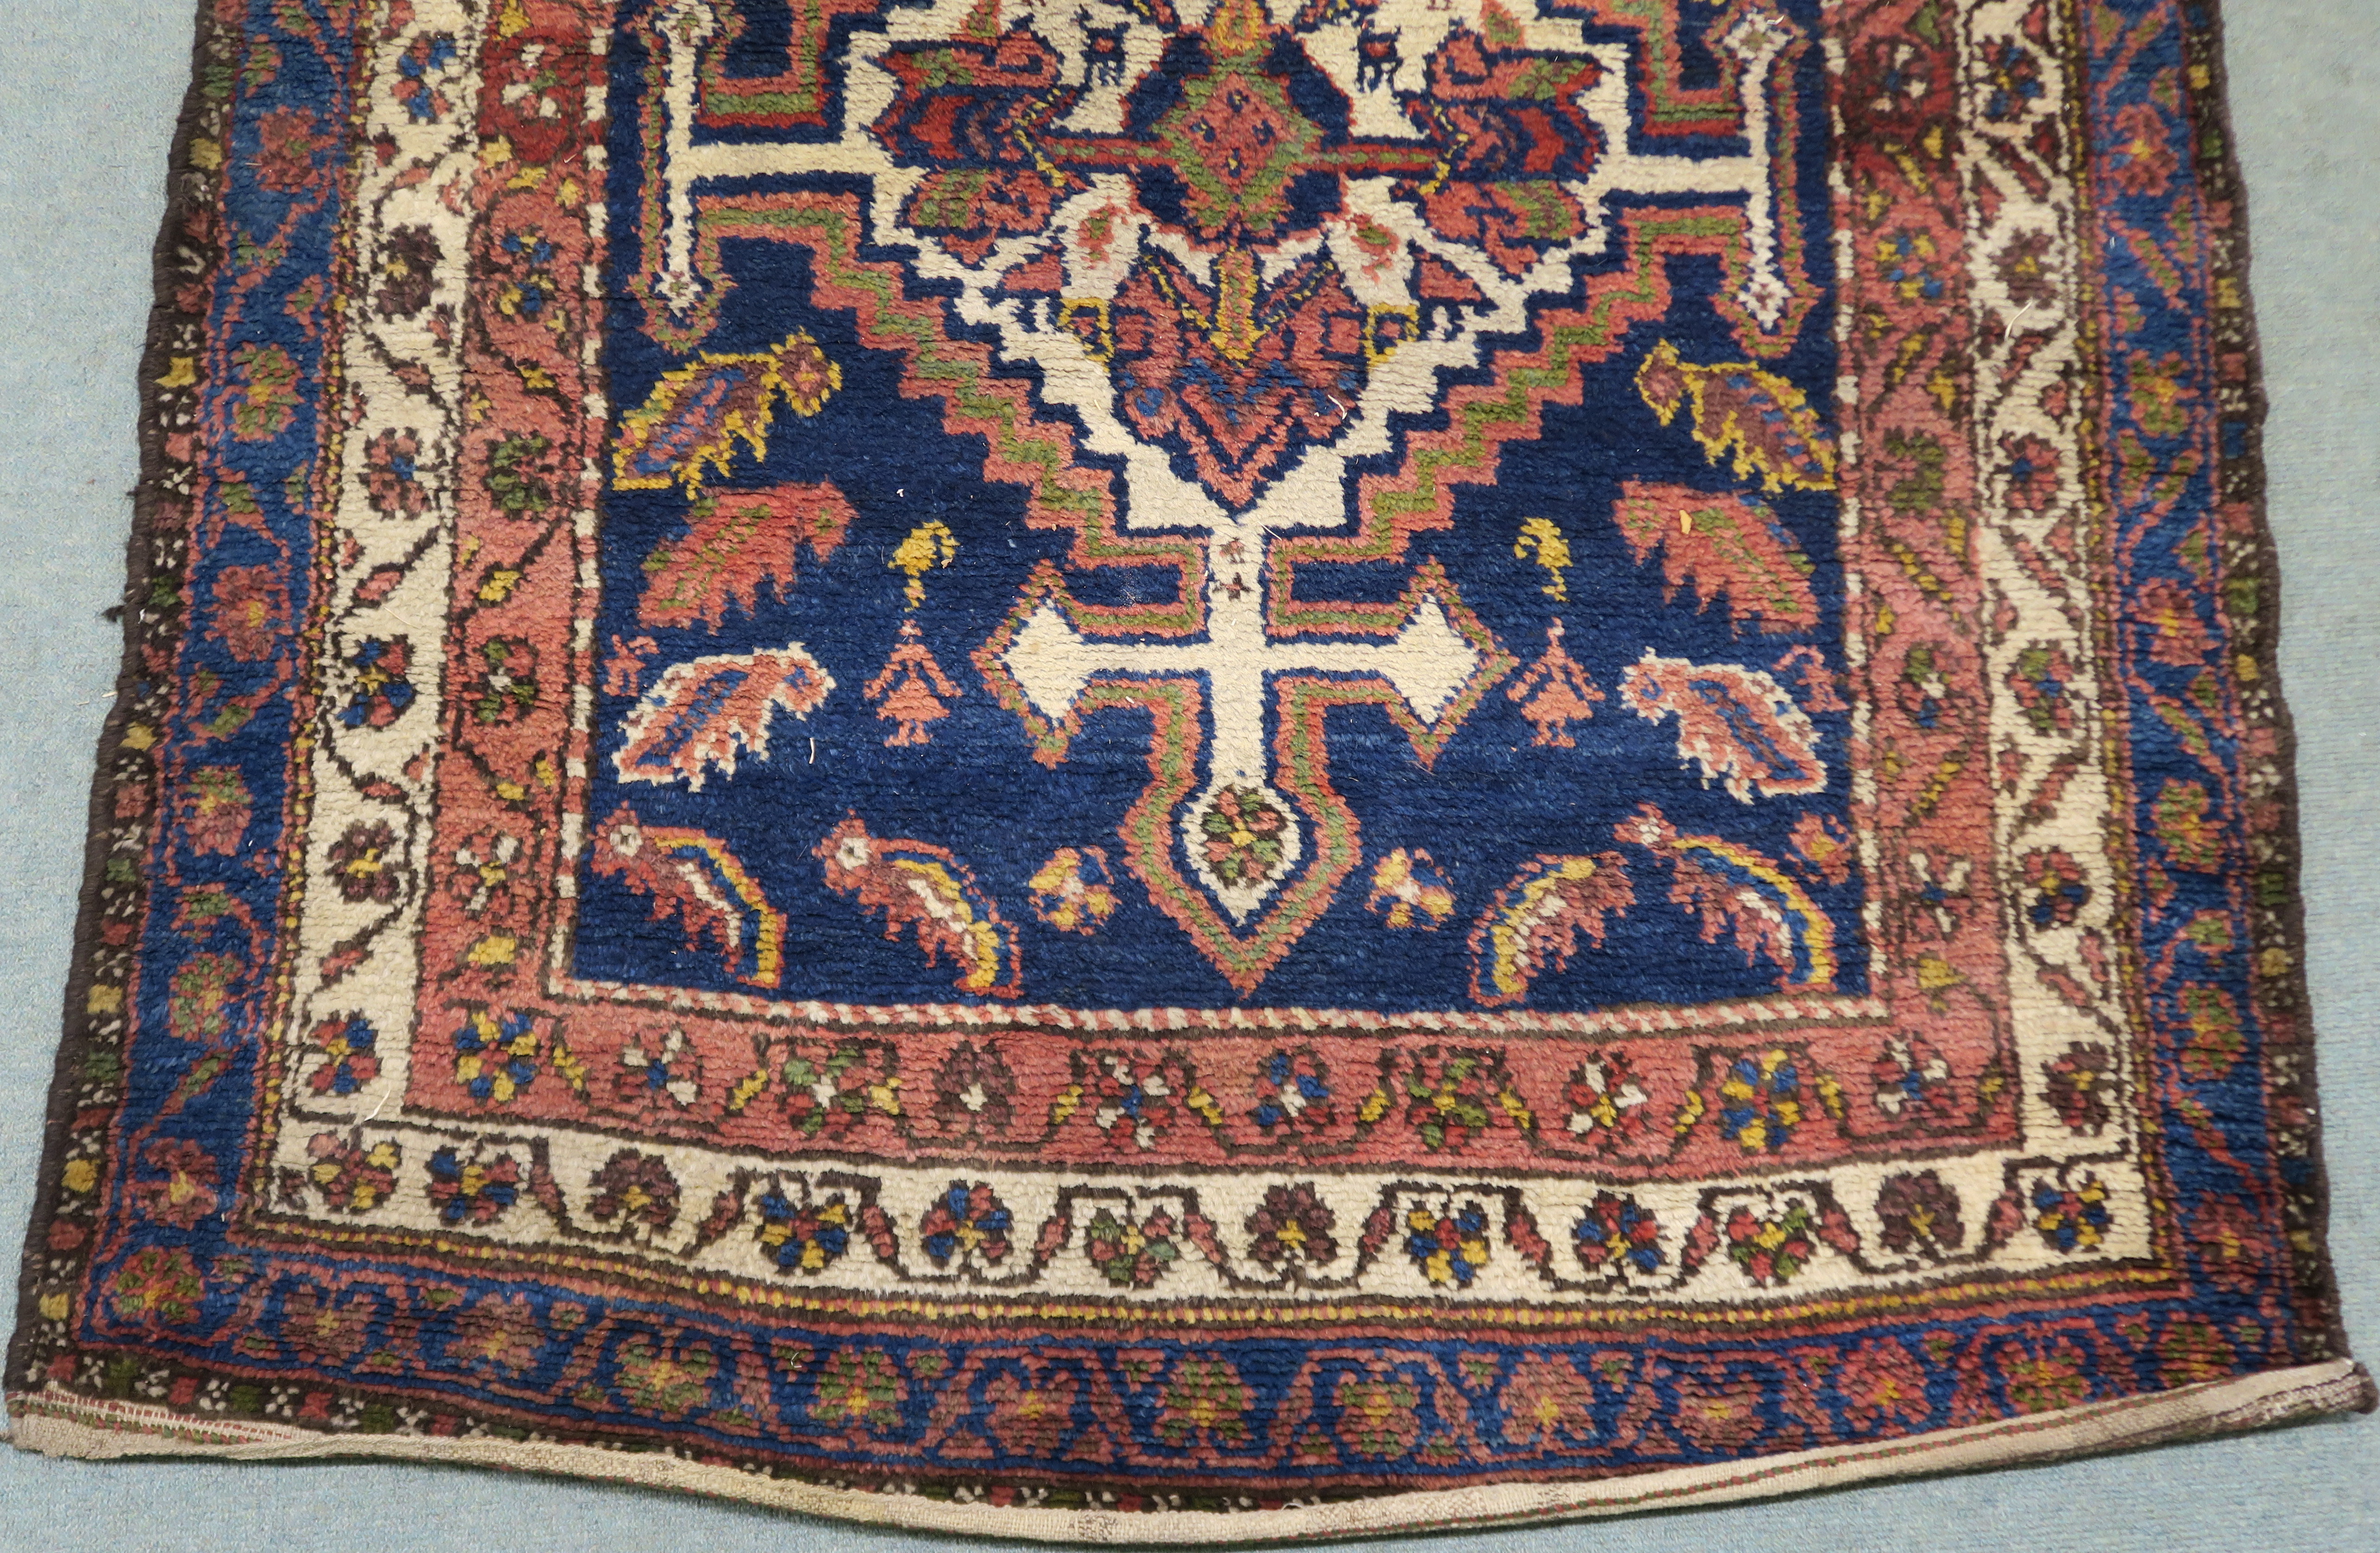 A blue ground Eastern rug with stylised birds and animals with two central medallions, 225cm x 123cm - Image 3 of 4